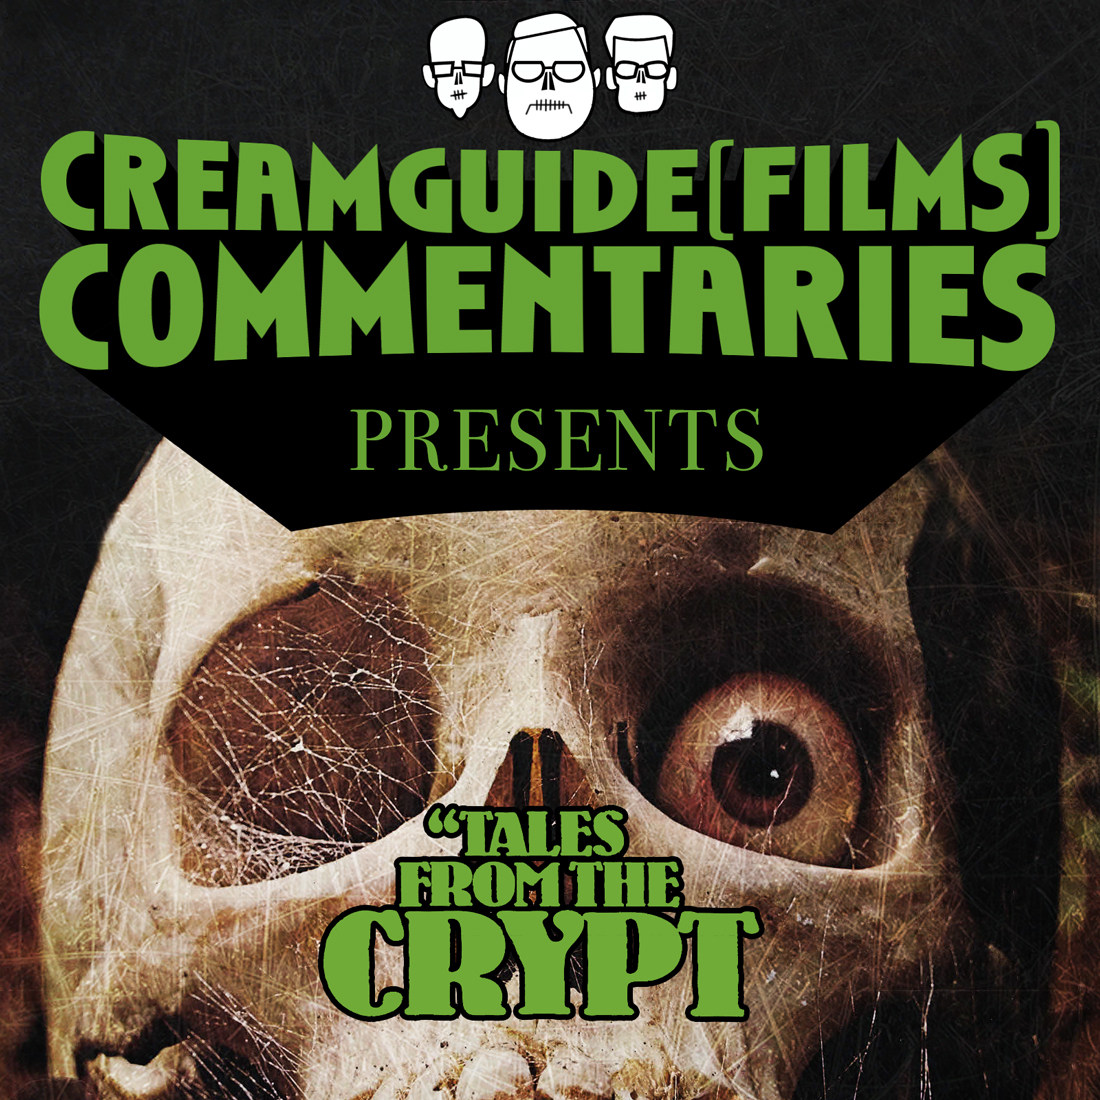 Creamguide (Films) Commentaries: Tales from the Crypt